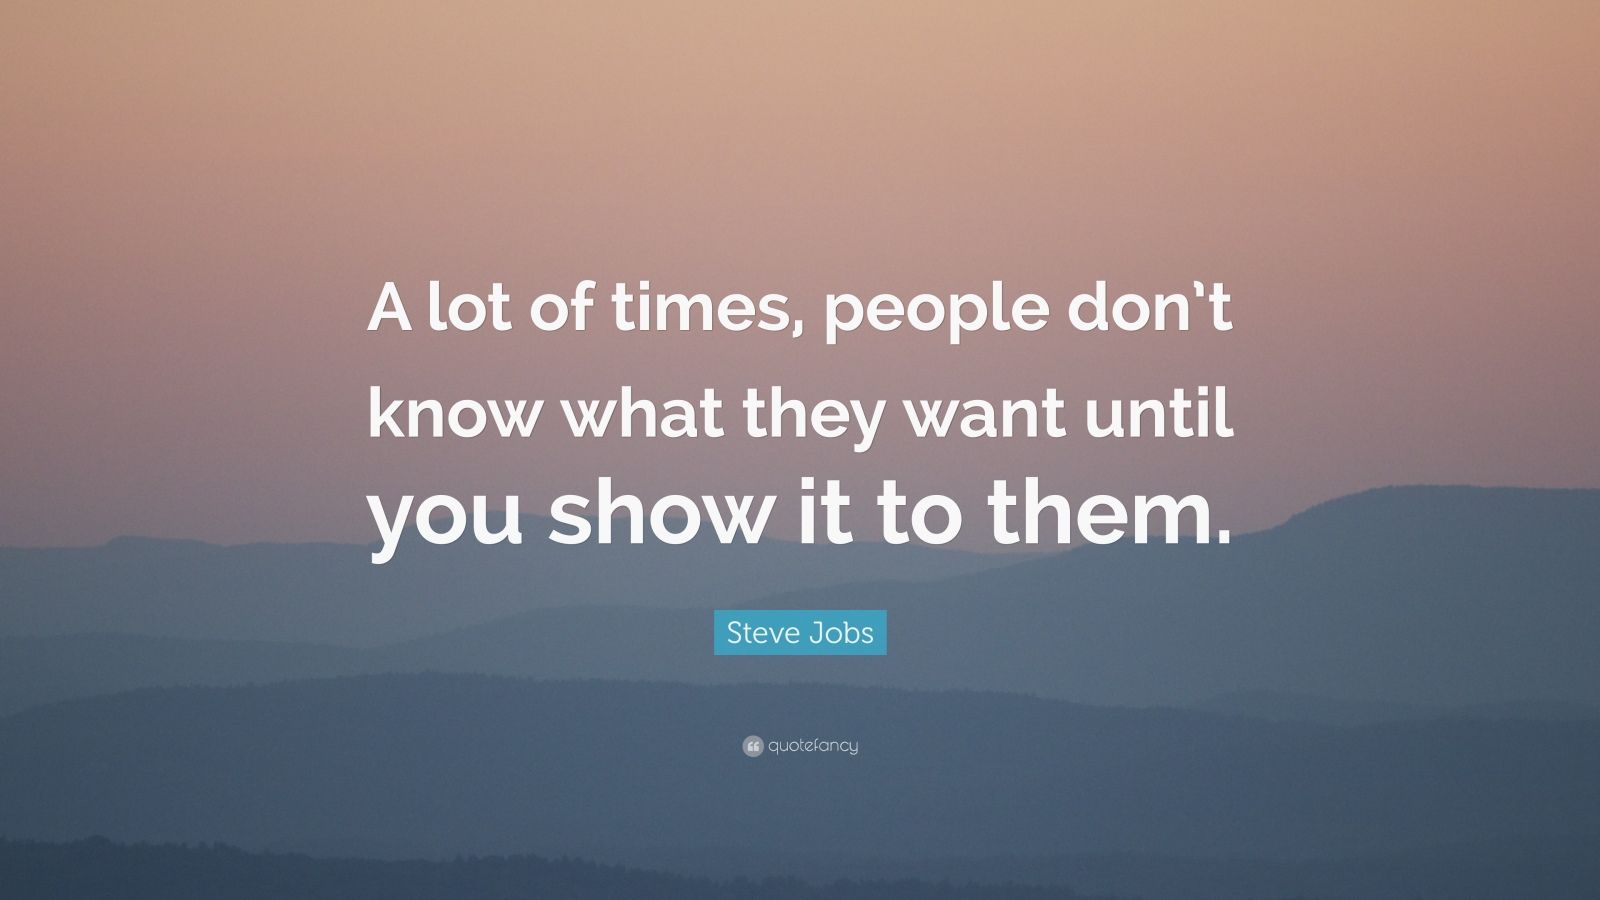 Steve Jobs Quote: “A lot of times, people don’t know what they want